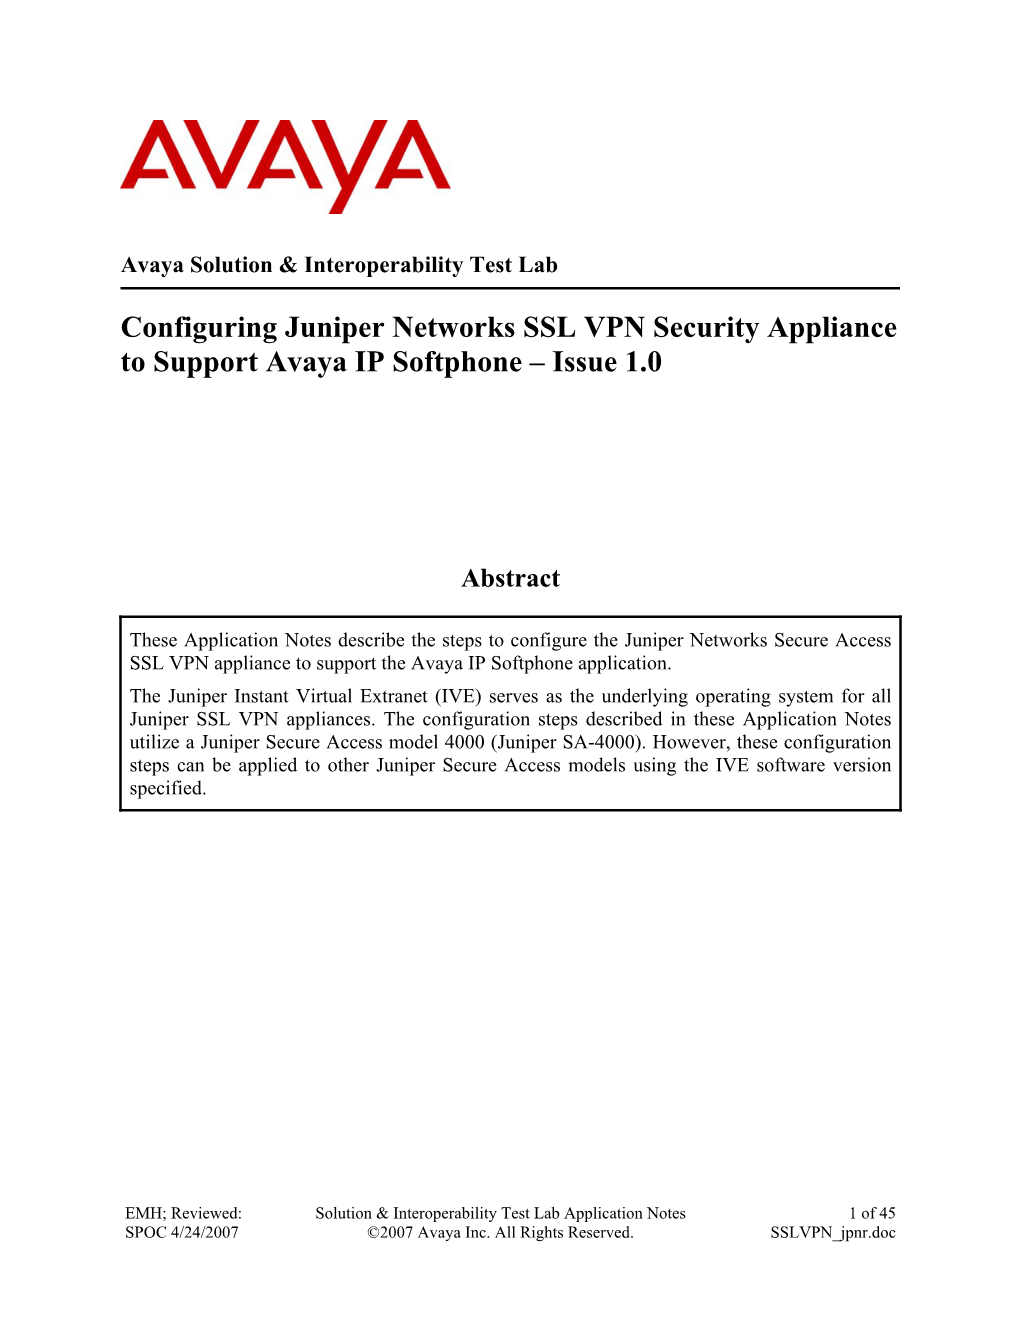 Configuring Juniper Networks SSL VPN Security Appliance to Support Avaya IP Softphone – Issue 1.0